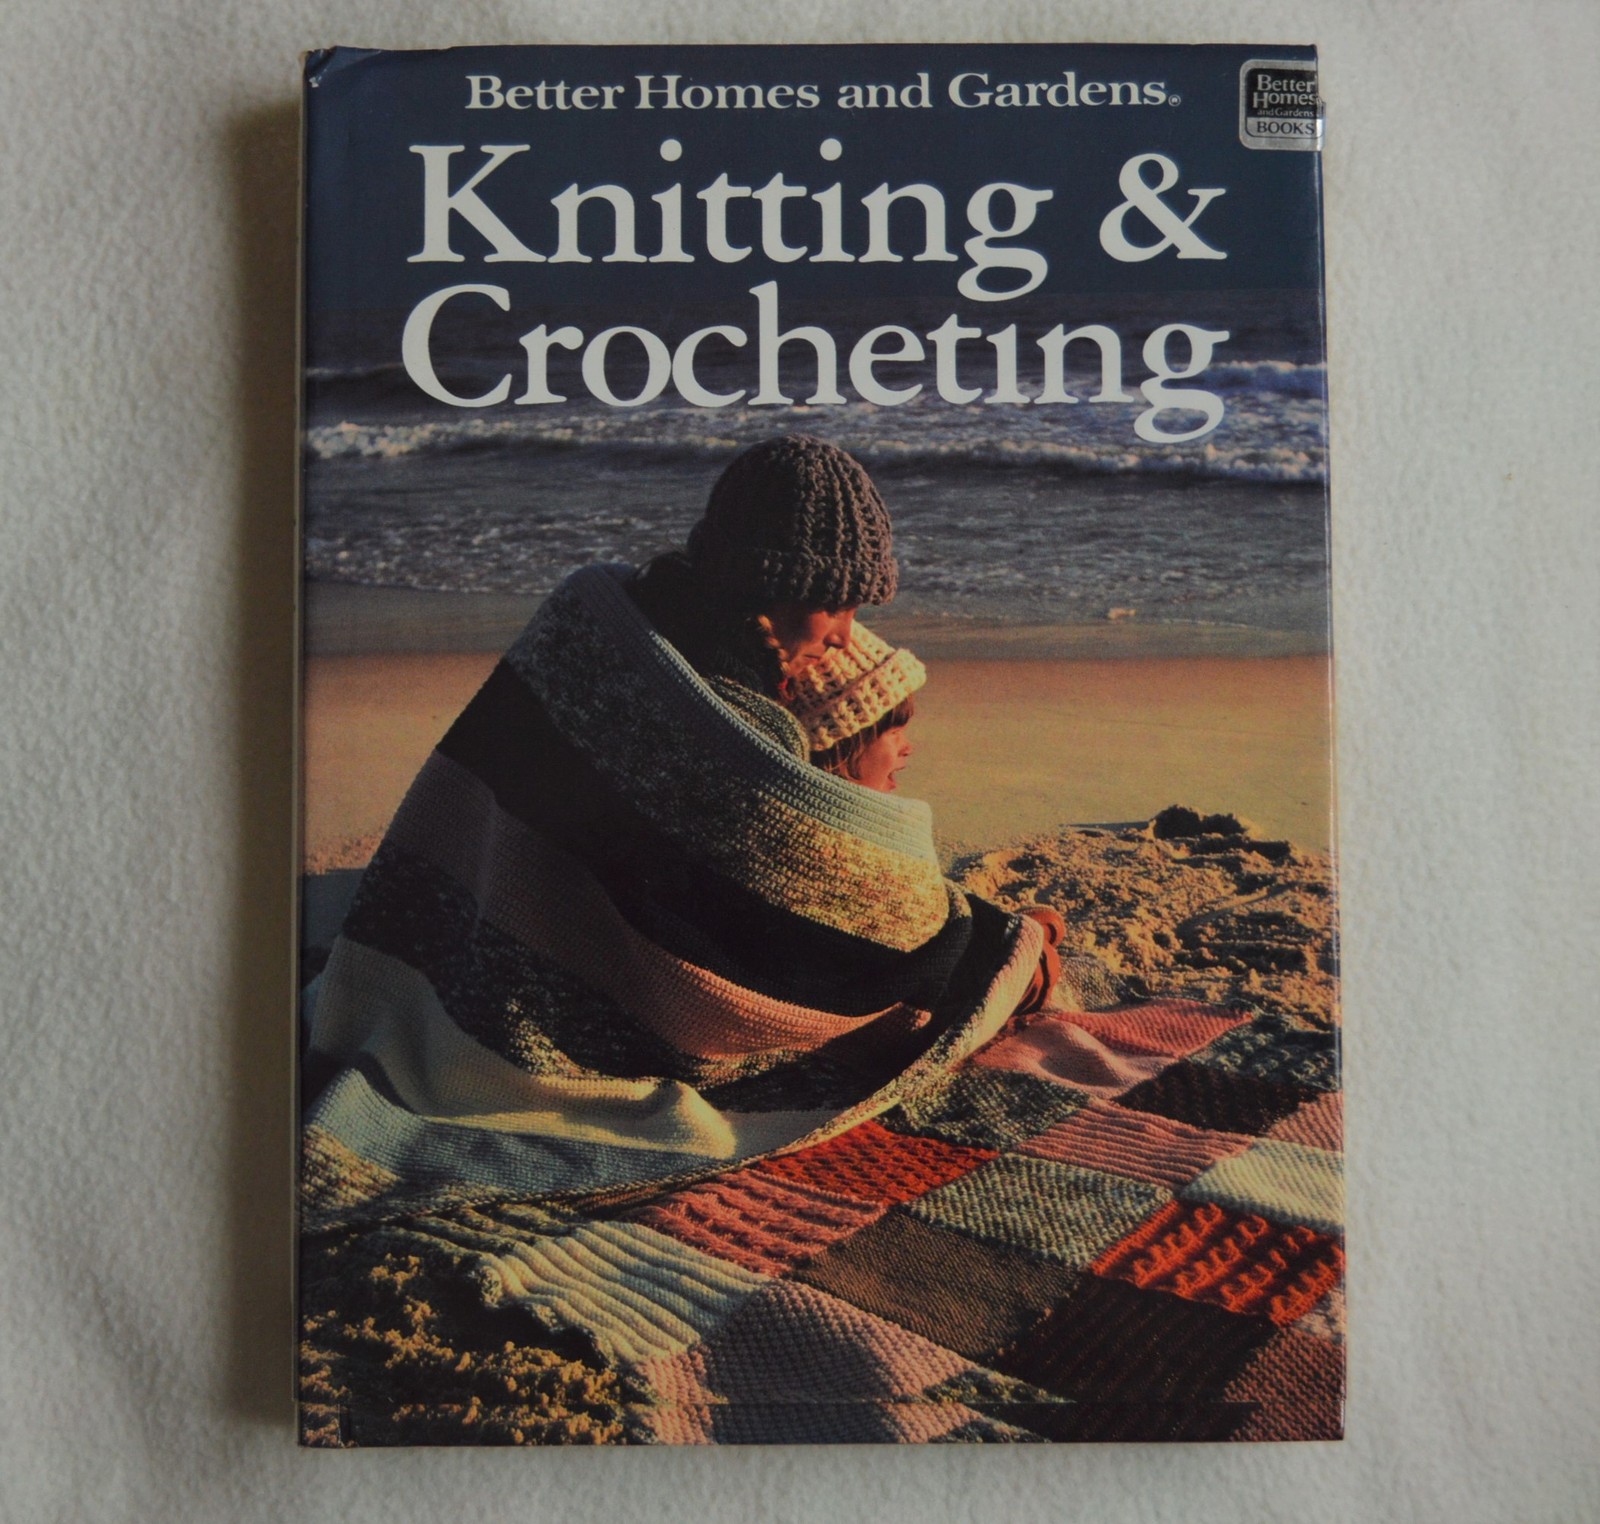 Knitting & Crocheting Better Homes and Gardens Illustrated Instruction 1986 - $12.50